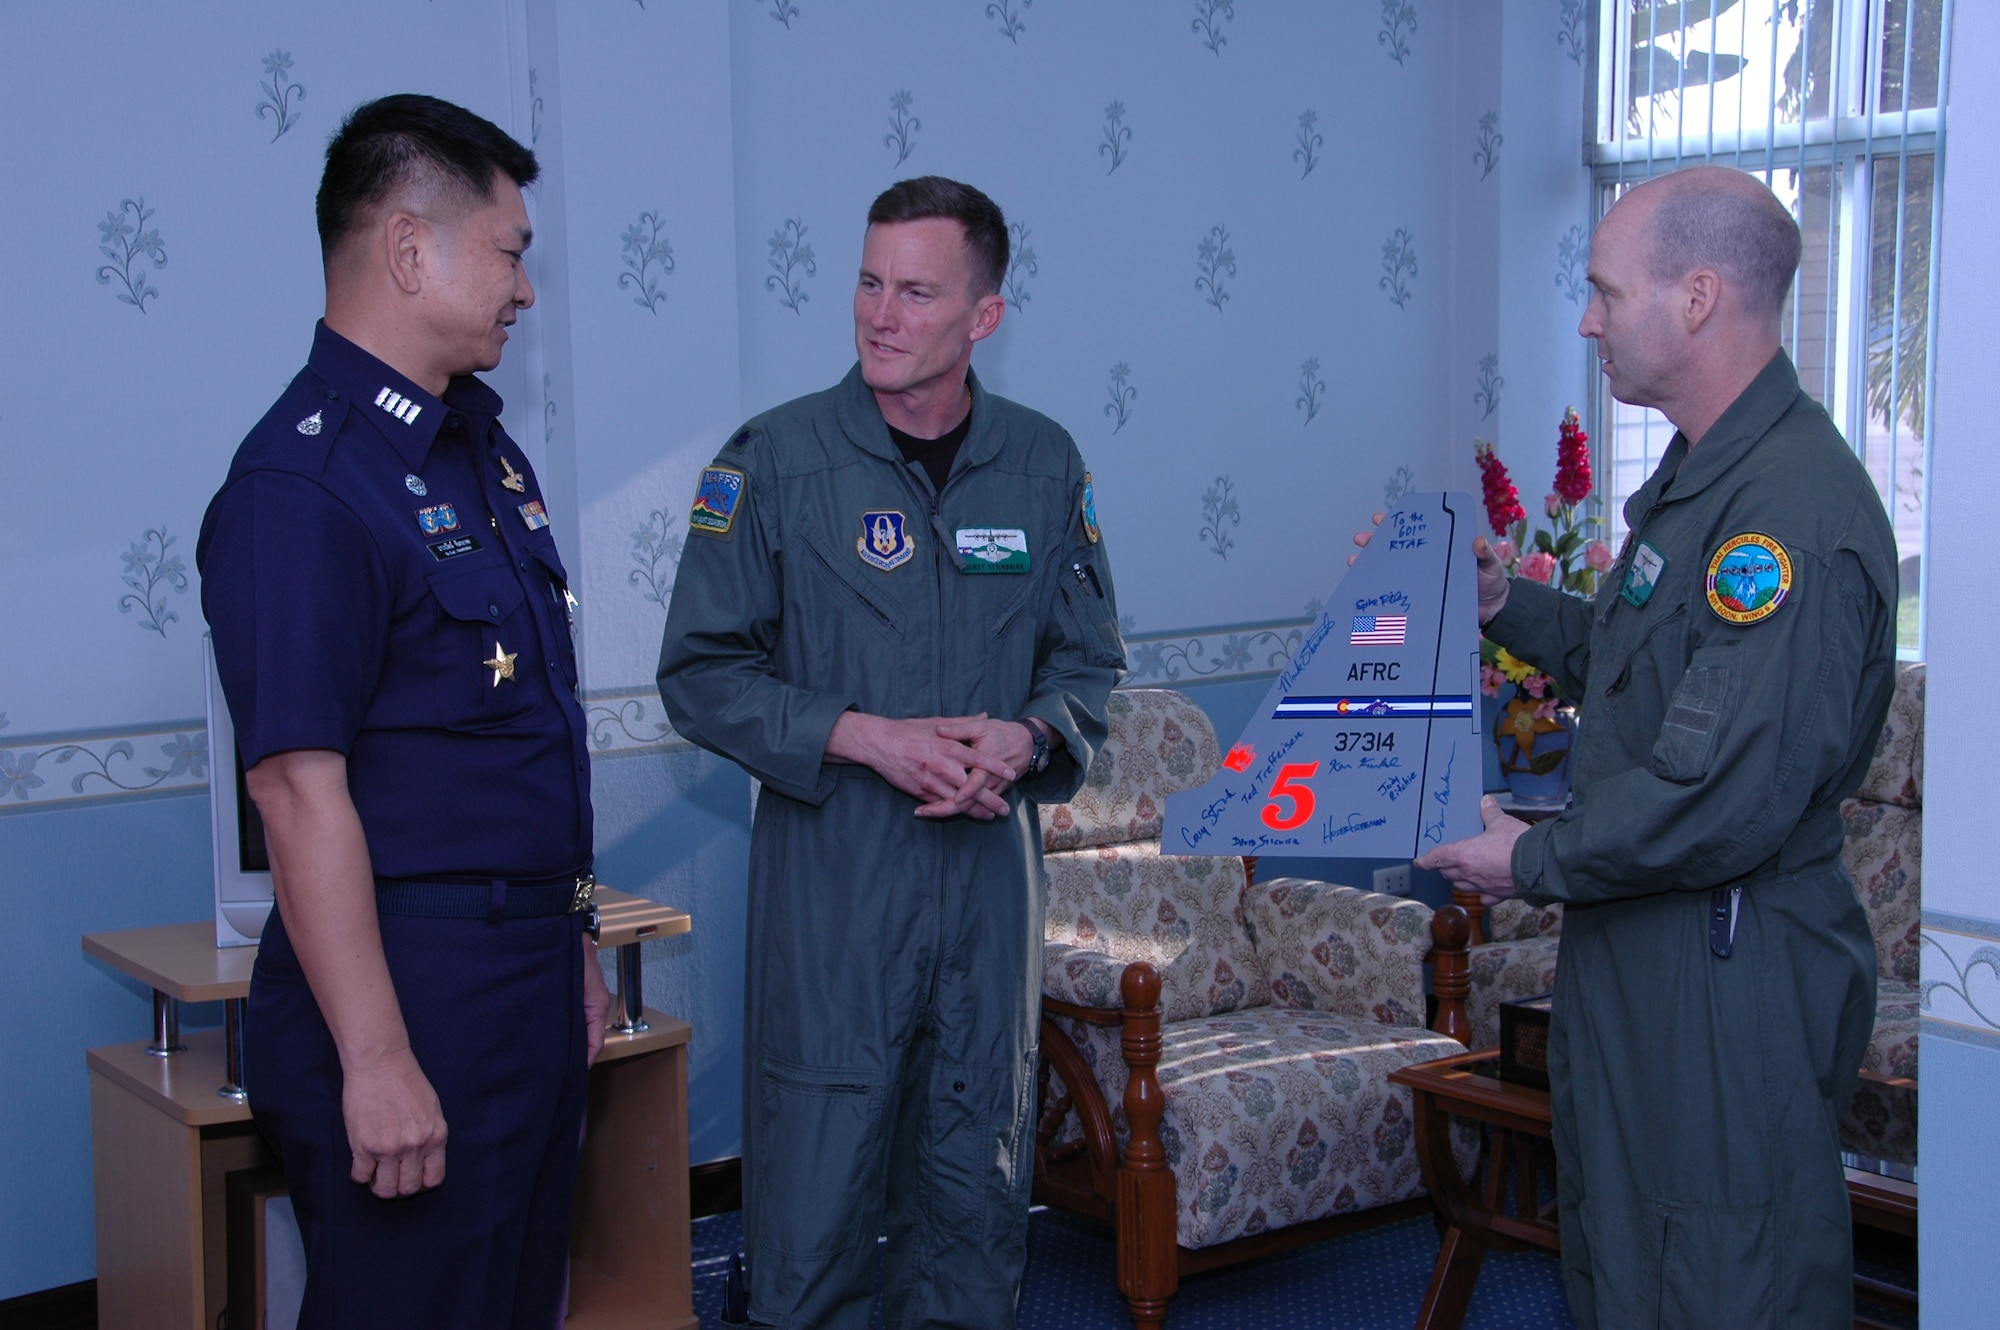 Lt. Col. Corey L. Steinbrink, mission commander (center), and Chief Master Sgt. James D. Riley, chief loadmaster (right), with the Air Force Reserve’s 302nd Airlift Wing, present Special Group Captain (Brig Gen equivalent) Thawonwat Chantanagama, Deputy Director, Director of Operations, Royal Thai Air Force, with a replica tail flash to recognize completion of Modular Airborne Firefighting System training.  The bright orange number “5” on the tail flash signifies the MAFFS unit number flown in the aircraft.  More than 50 members of the RTAF attended the 302 AW-led training to increase their proficiency with the MAFFS system.  Seven 302 AW members traveled to Thailand to provide expert training on safe and effective C-130 MAFFS operations.  This event marks the first time the Air Force Reserve has sent delegates to train a foreign Air Force on use of the MAFFS equipment.  (U.S. Air Force photo/Capt. Jody L. Ritchie)